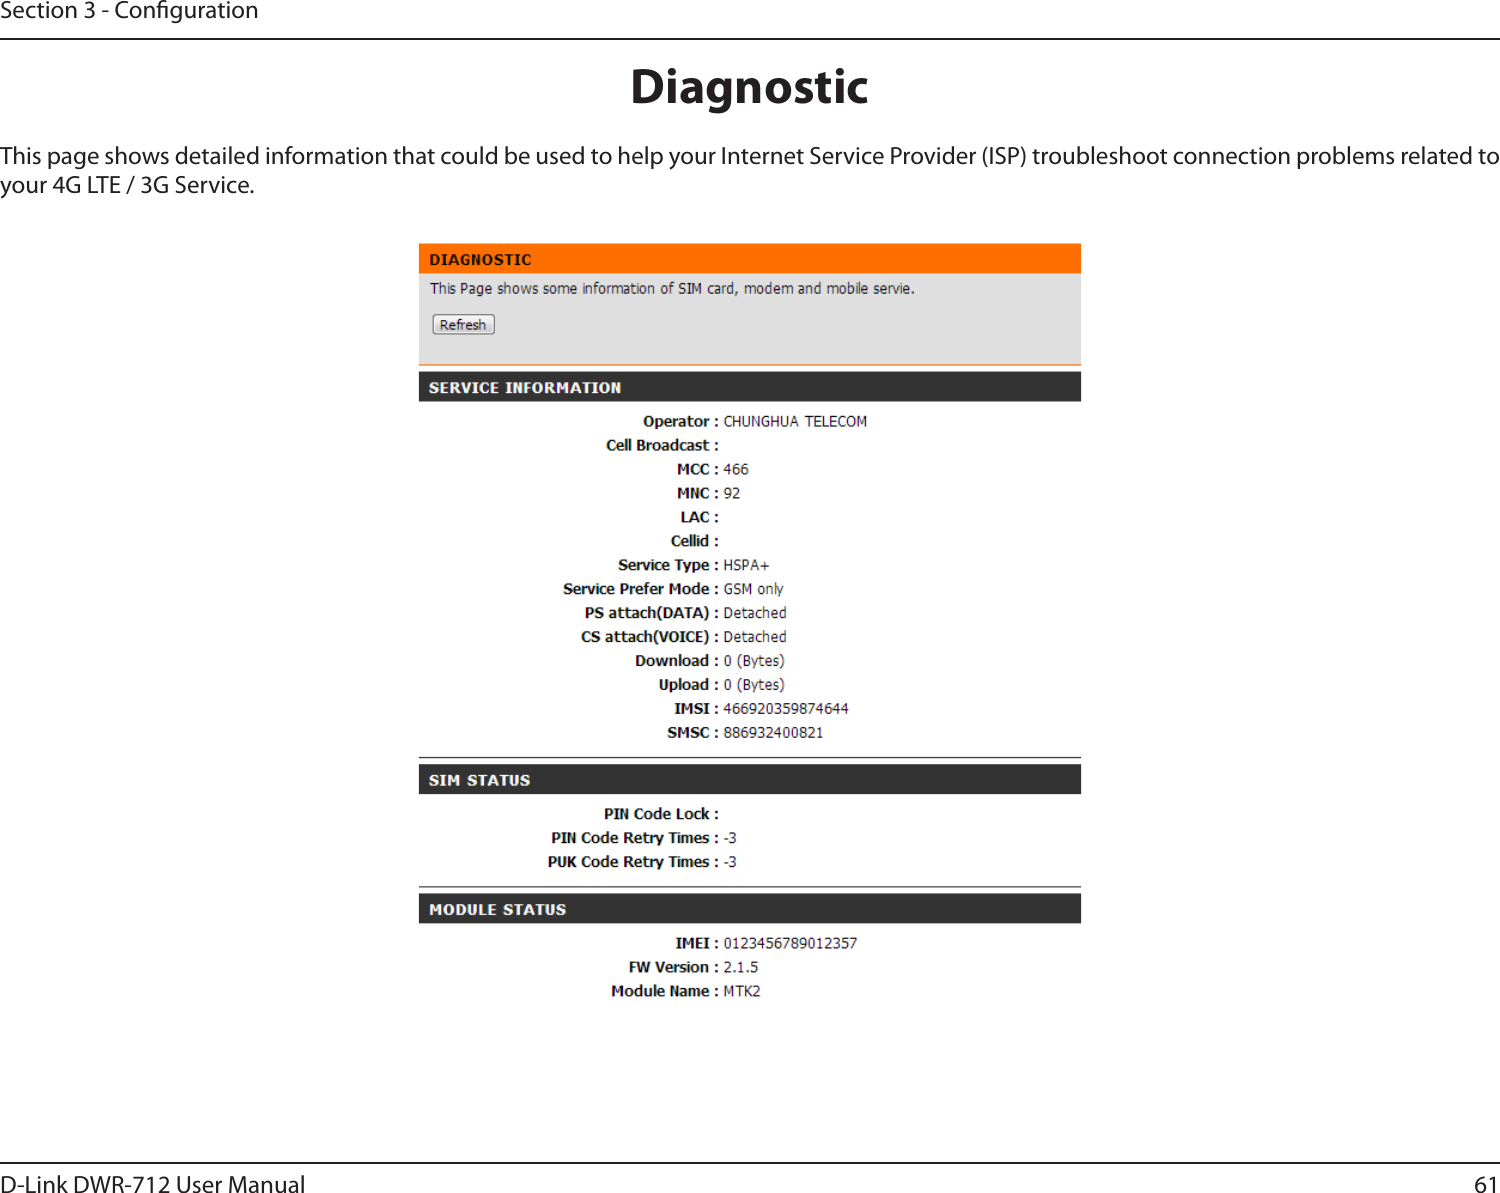 61D-Link DWR-712 User ManualSection 3 - CongurationDiagnosticThis page shows detailed information that could be used to help your Internet Service Provider (ISP) troubleshoot connection problems related to your 4G LTE / 3G Service.